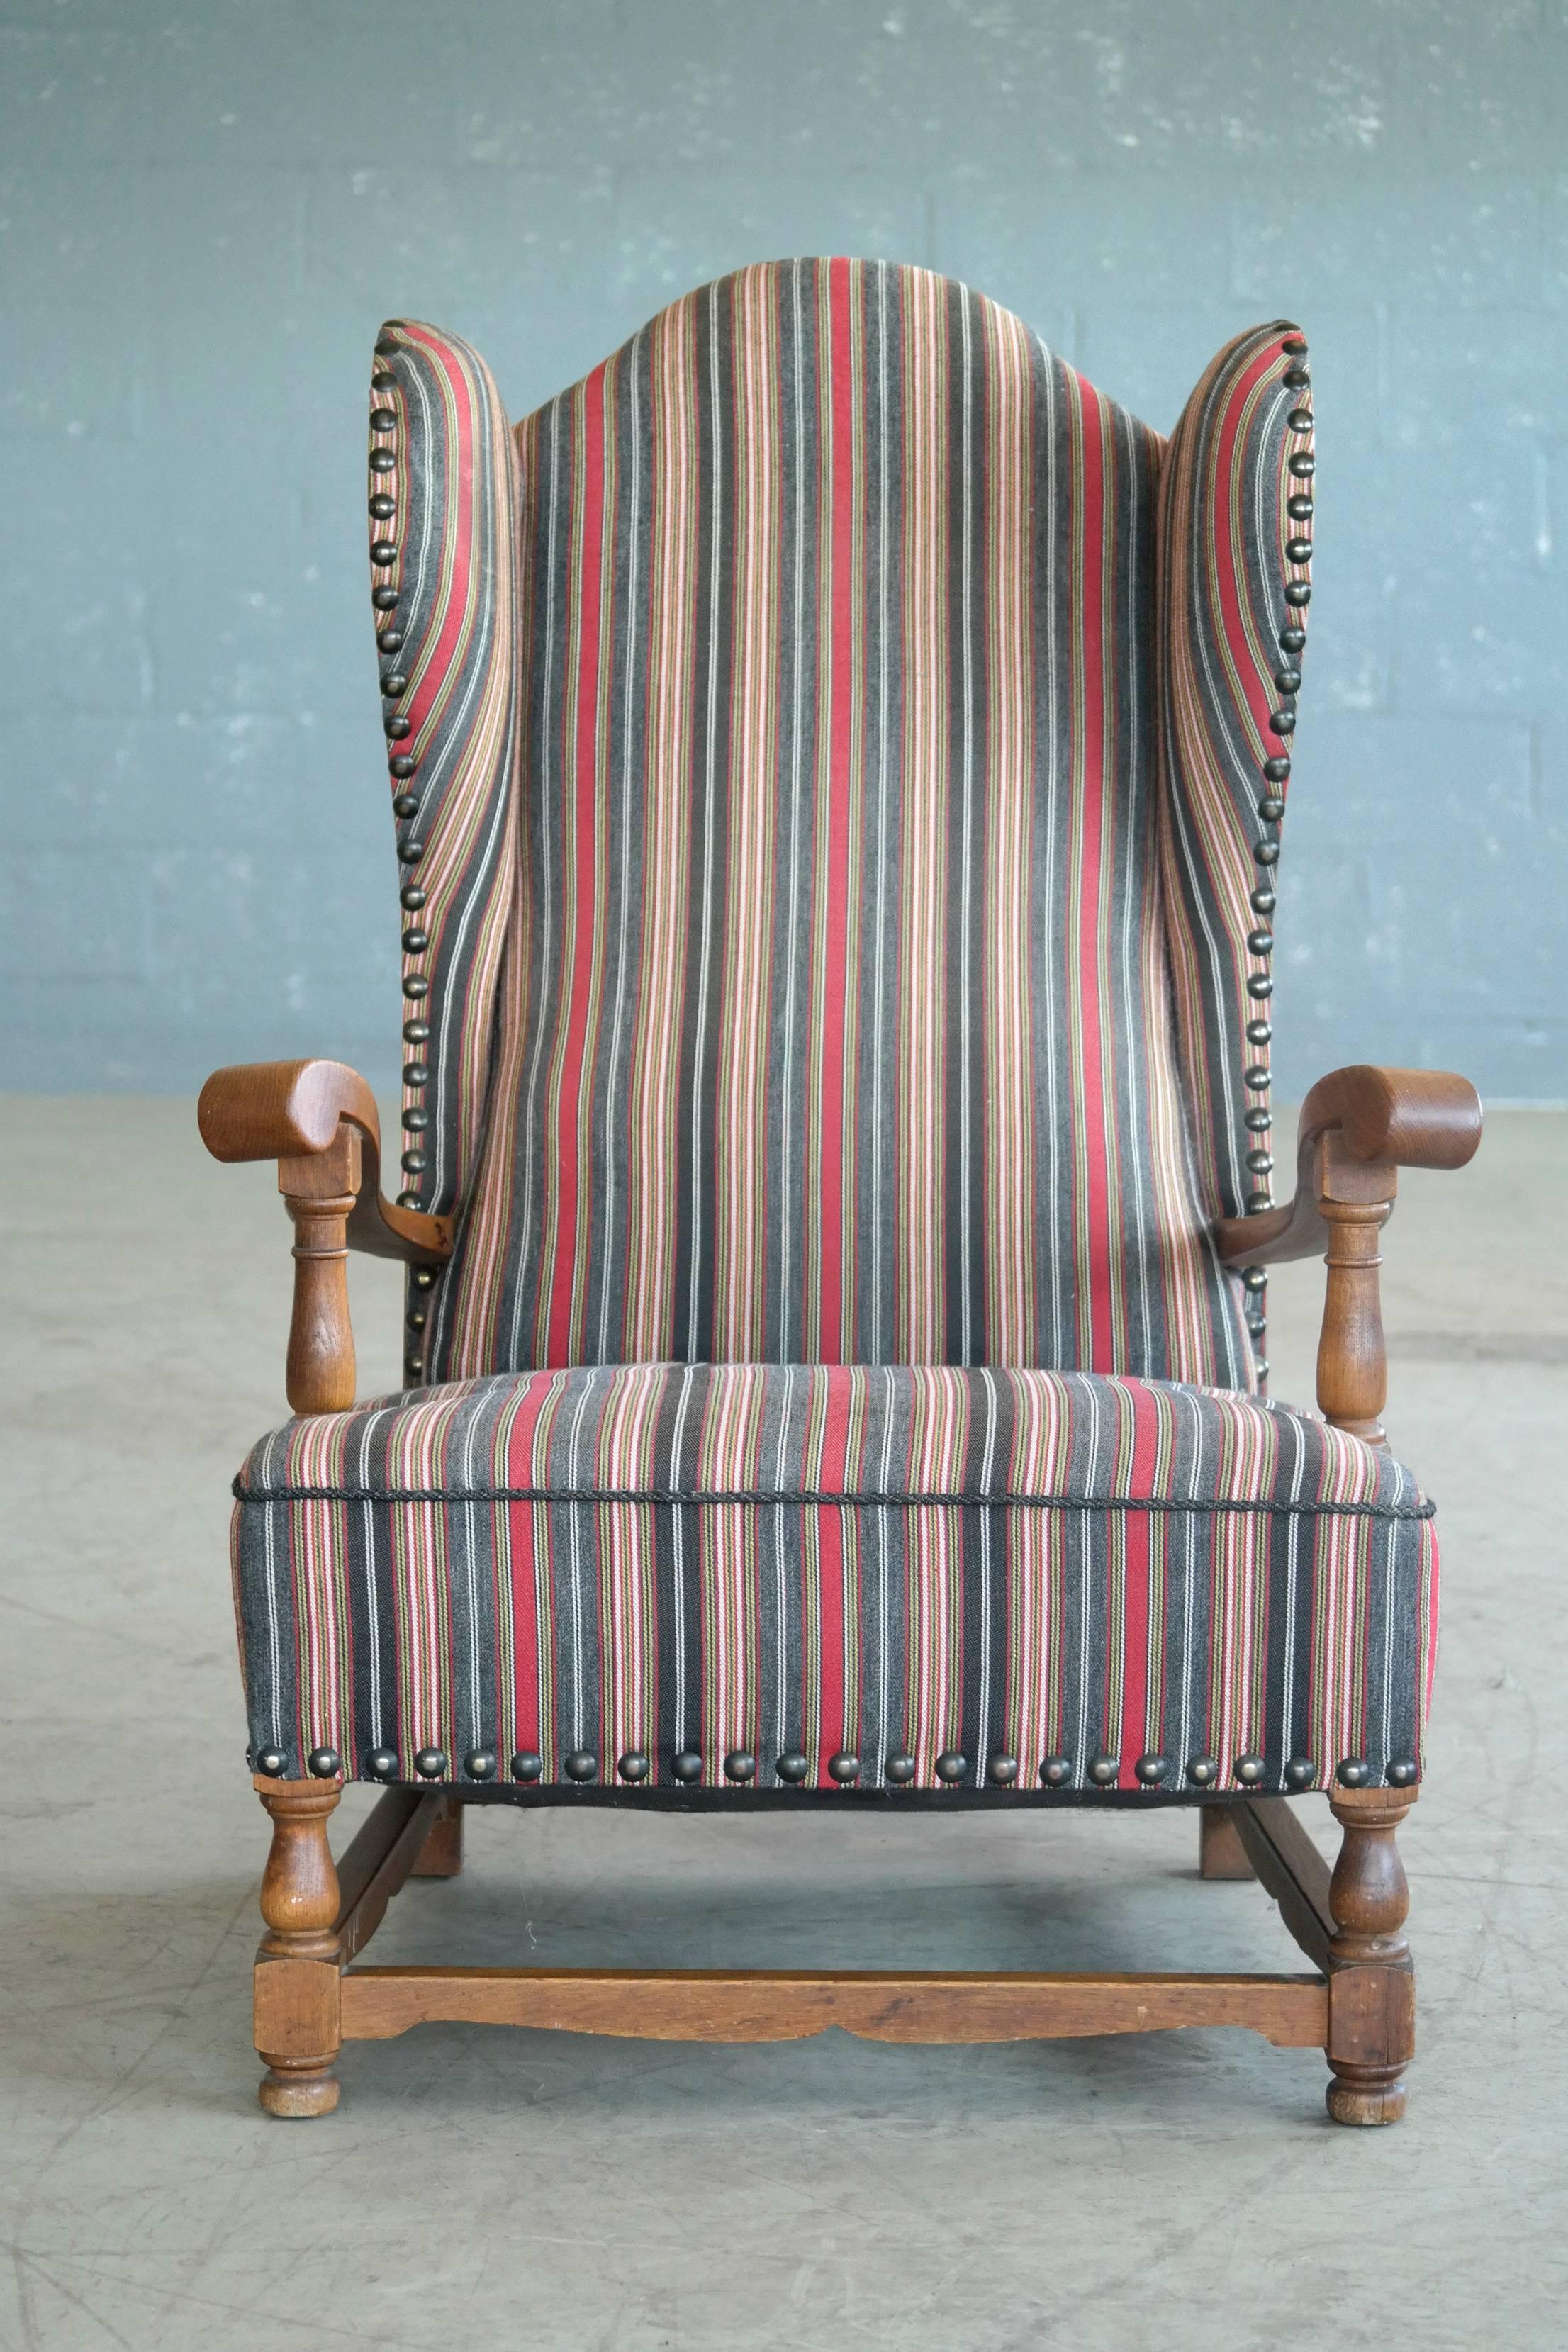 Great example of early Danish Mid-Century design, circa 1930s wingback chair in oak. Fantastic addition to the country home or the library. Fully refurbished and sturdy construction recovered in high quality striped wool. Minimal age wear and patina